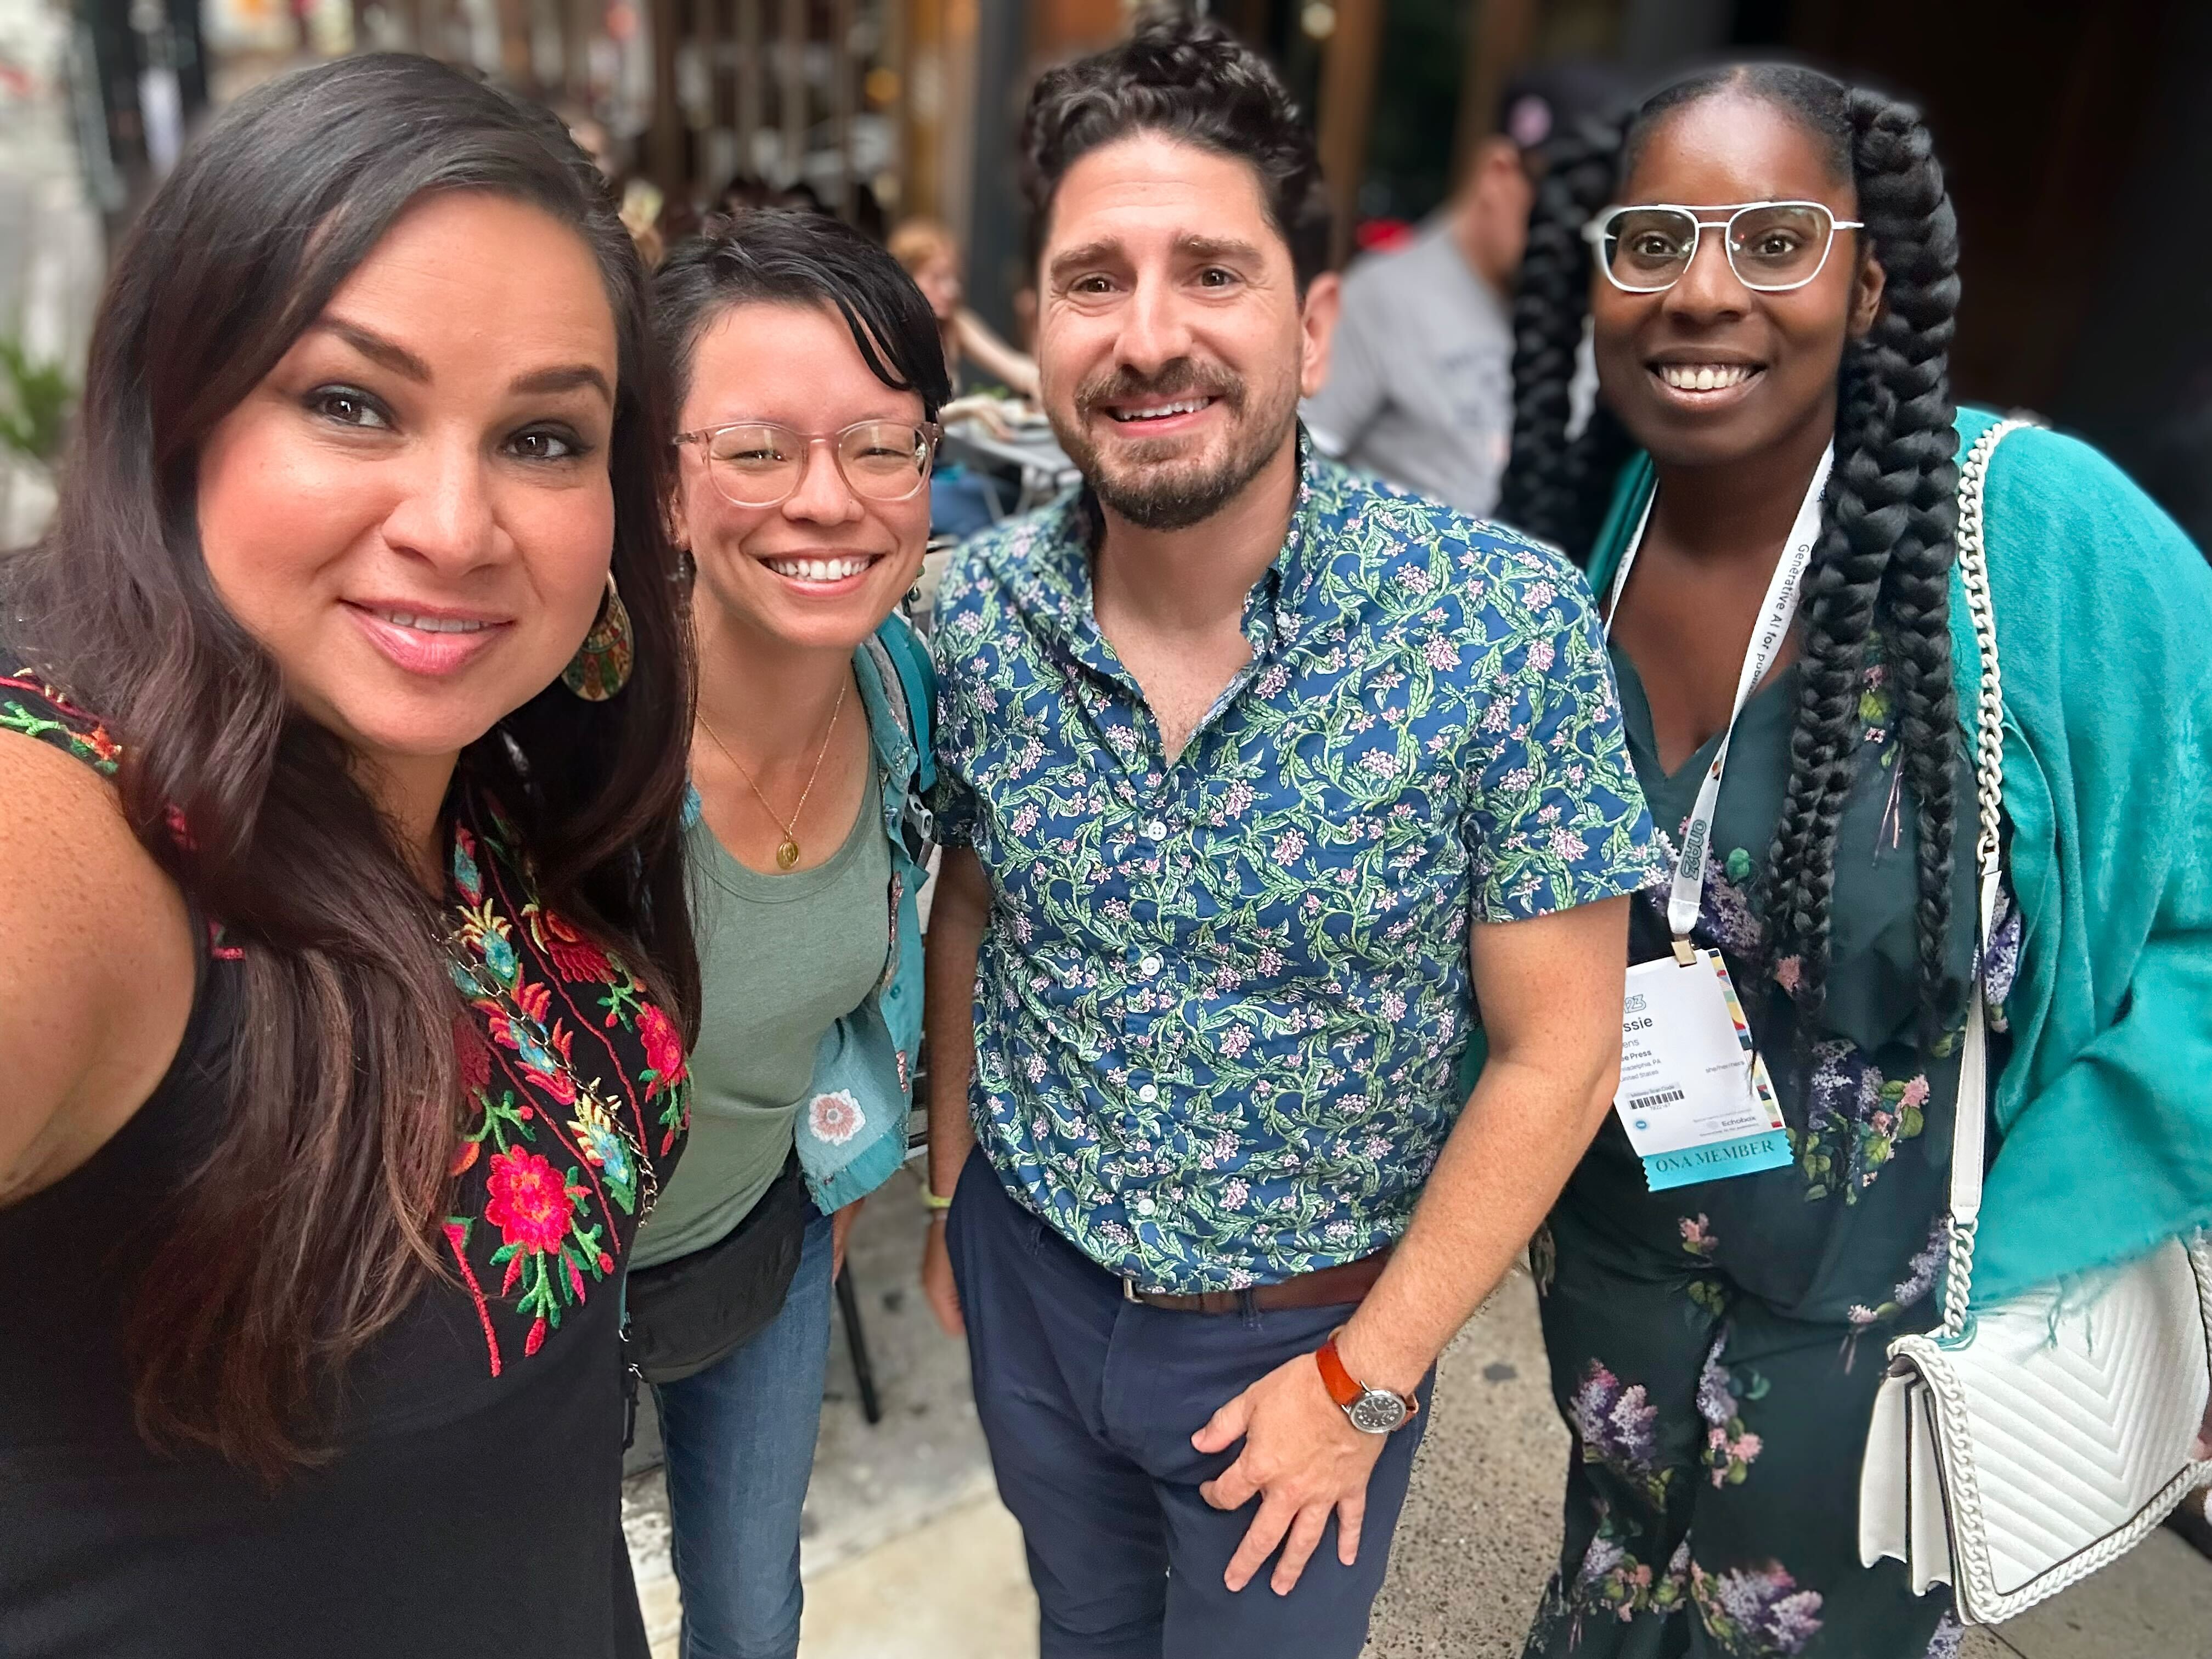 News Voices Director Vanessa Maria Graber with Free Press colleagues Alisha Wang Saville, Mike Rispoli and Cassie Owens at the ONA journalism conference